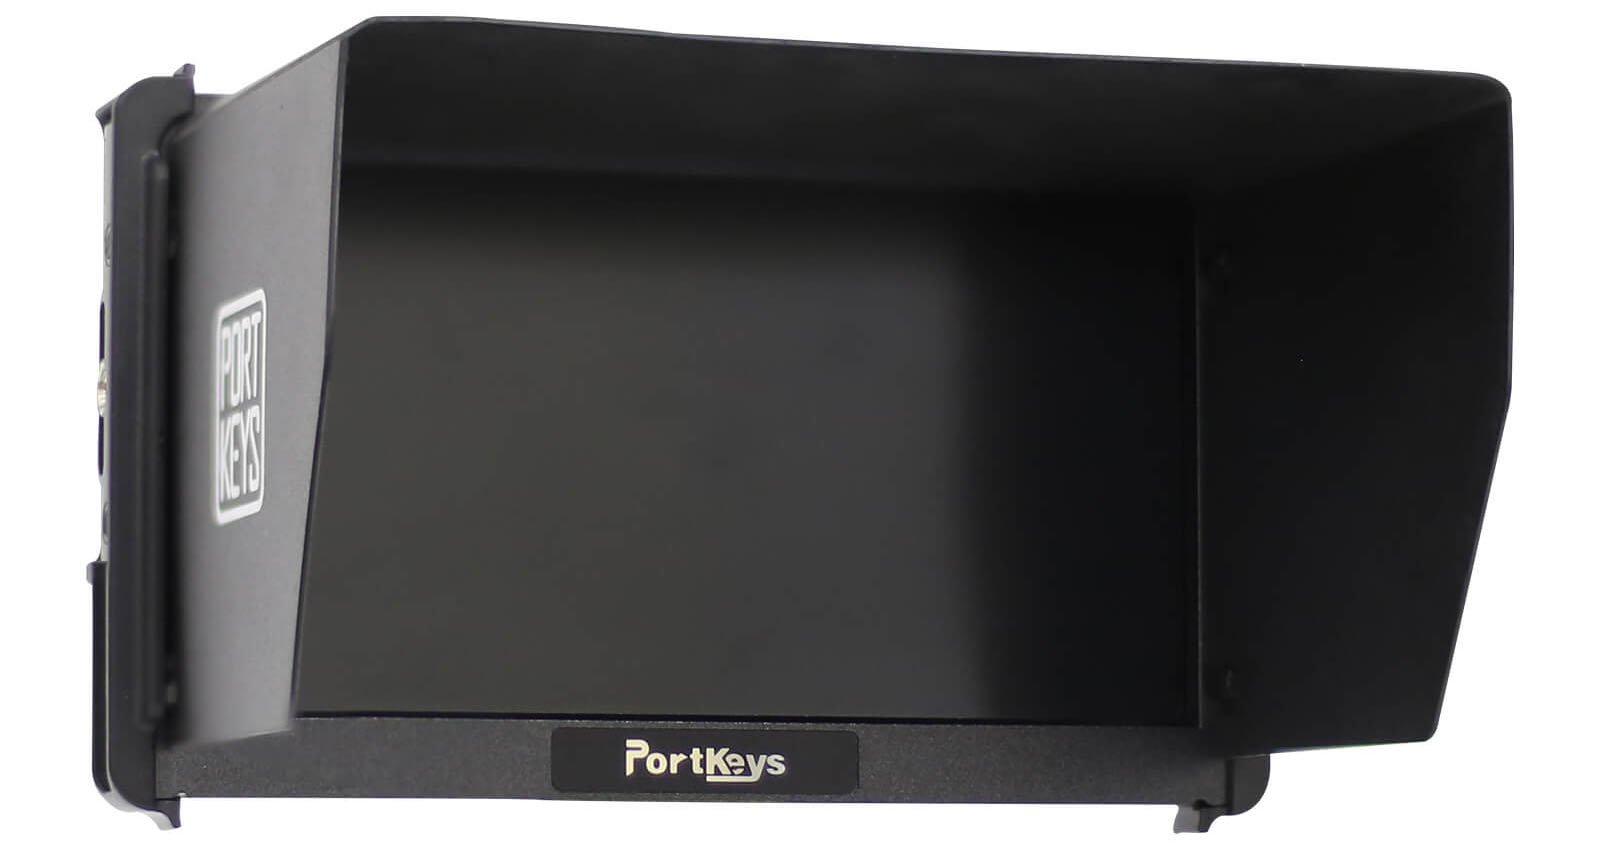 The image shows a PortKeys monitor hood with a black finish. The hood is designed to help shield a monitor from glare and sunlight, enhancing screen visibility. "PortKeys" branding is visible on the front and side of the hood.